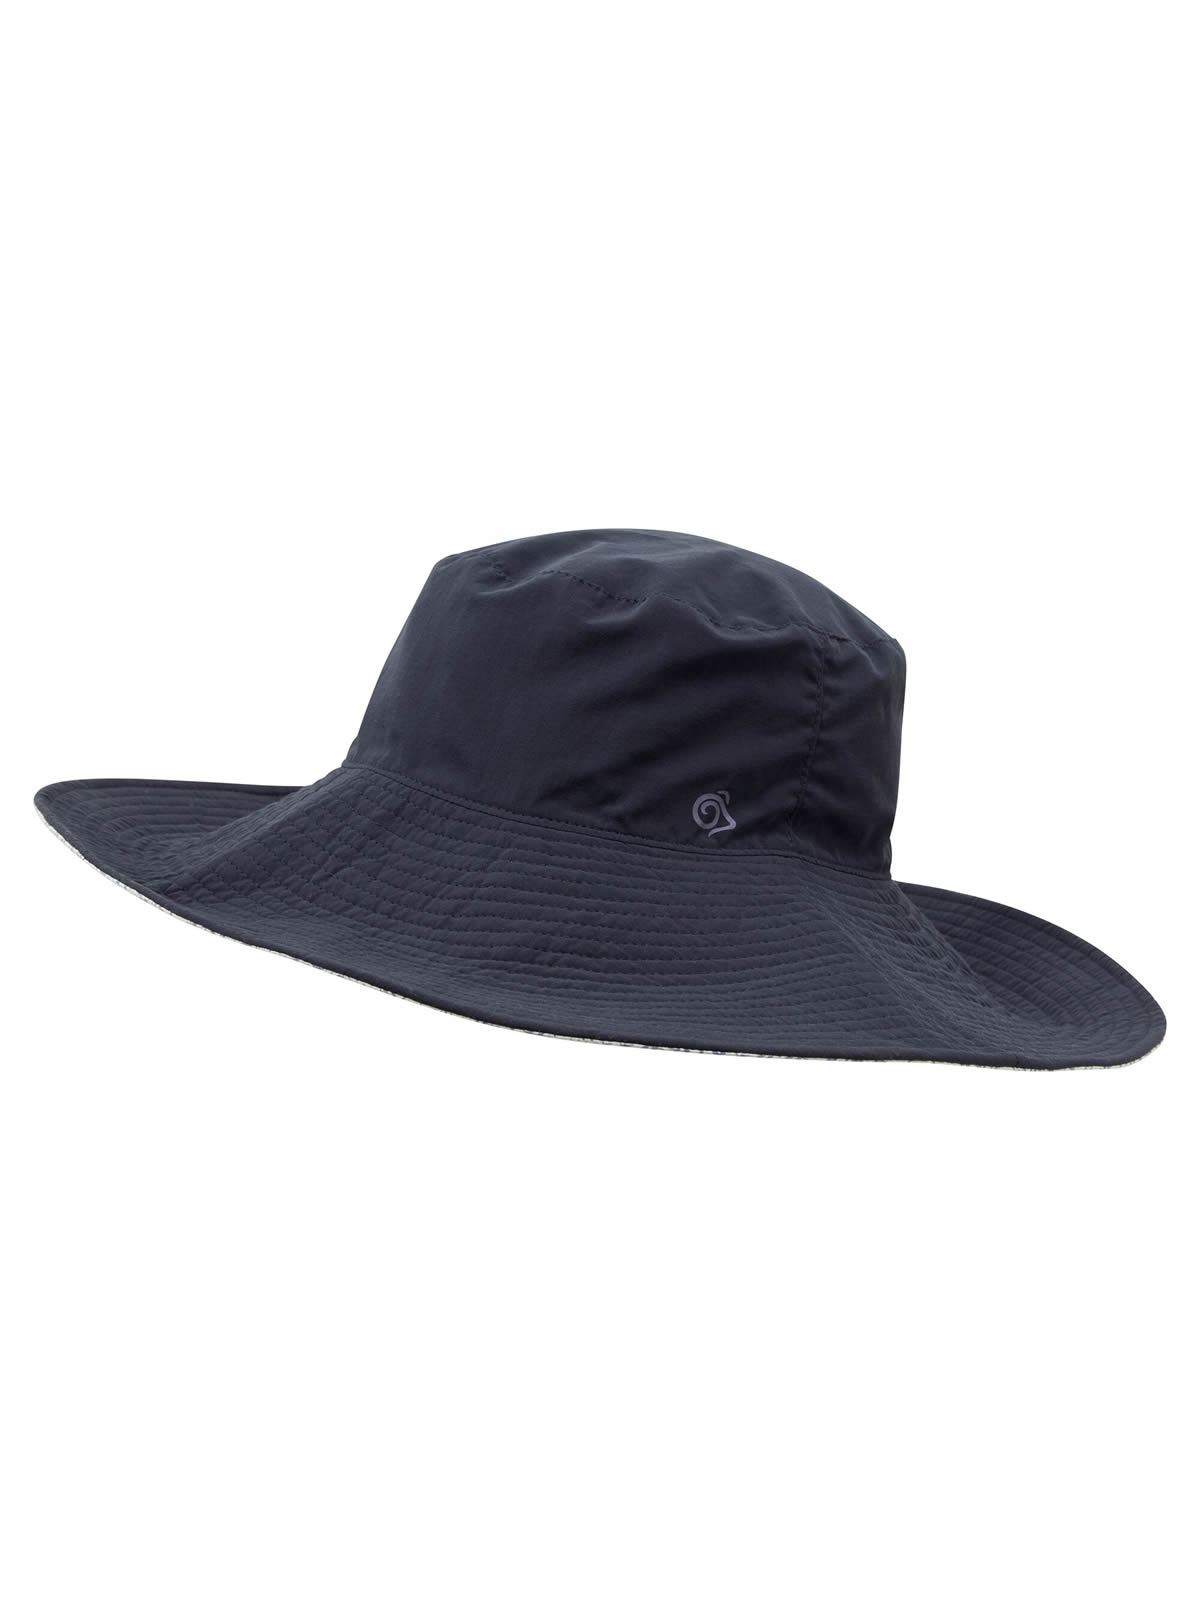 CWC081 Craghoppers NosiLife Reversible Pria Hat Blue Navy